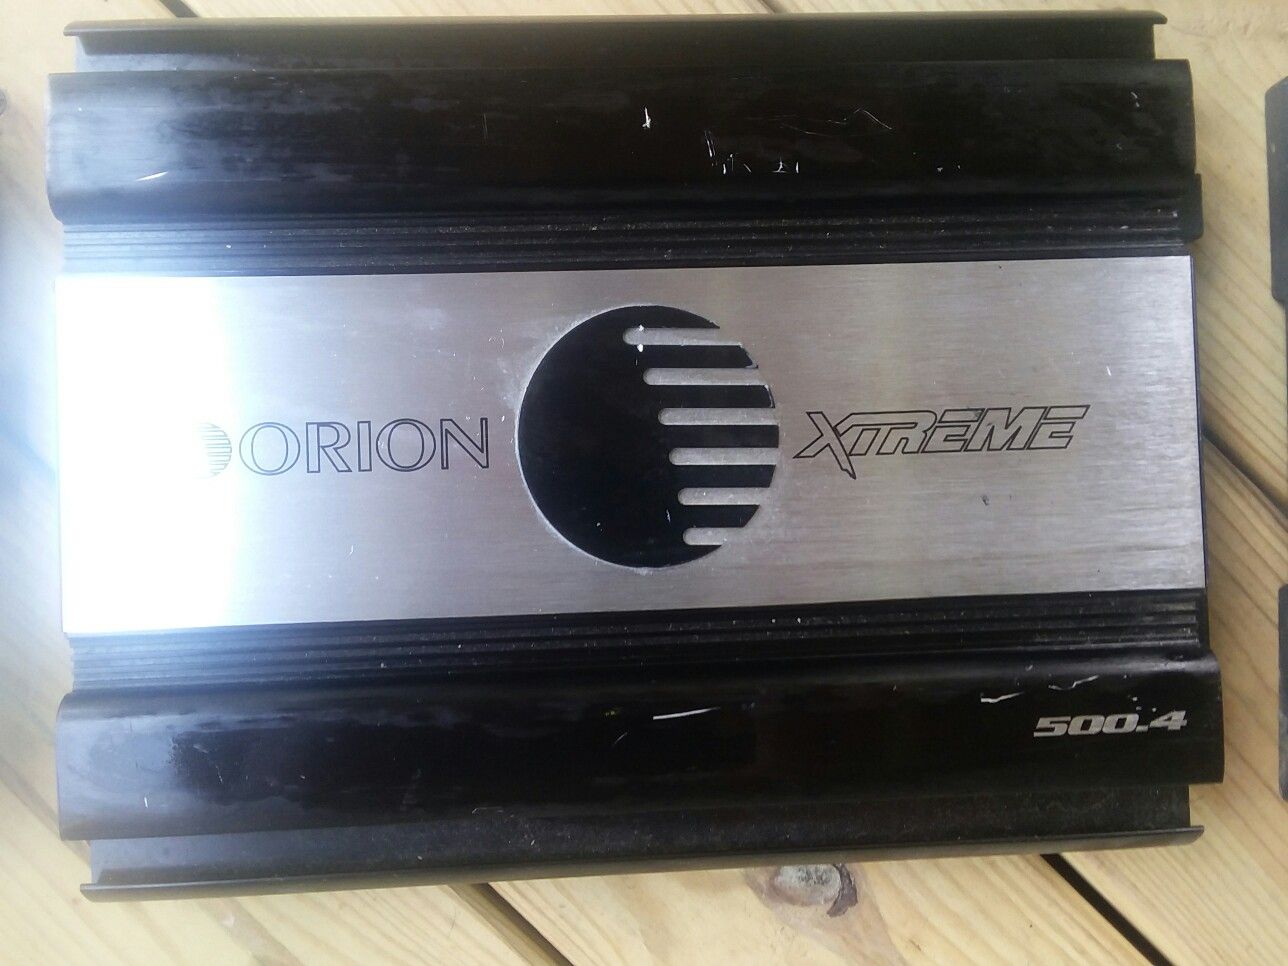 Orion Xtreme amp 500.4